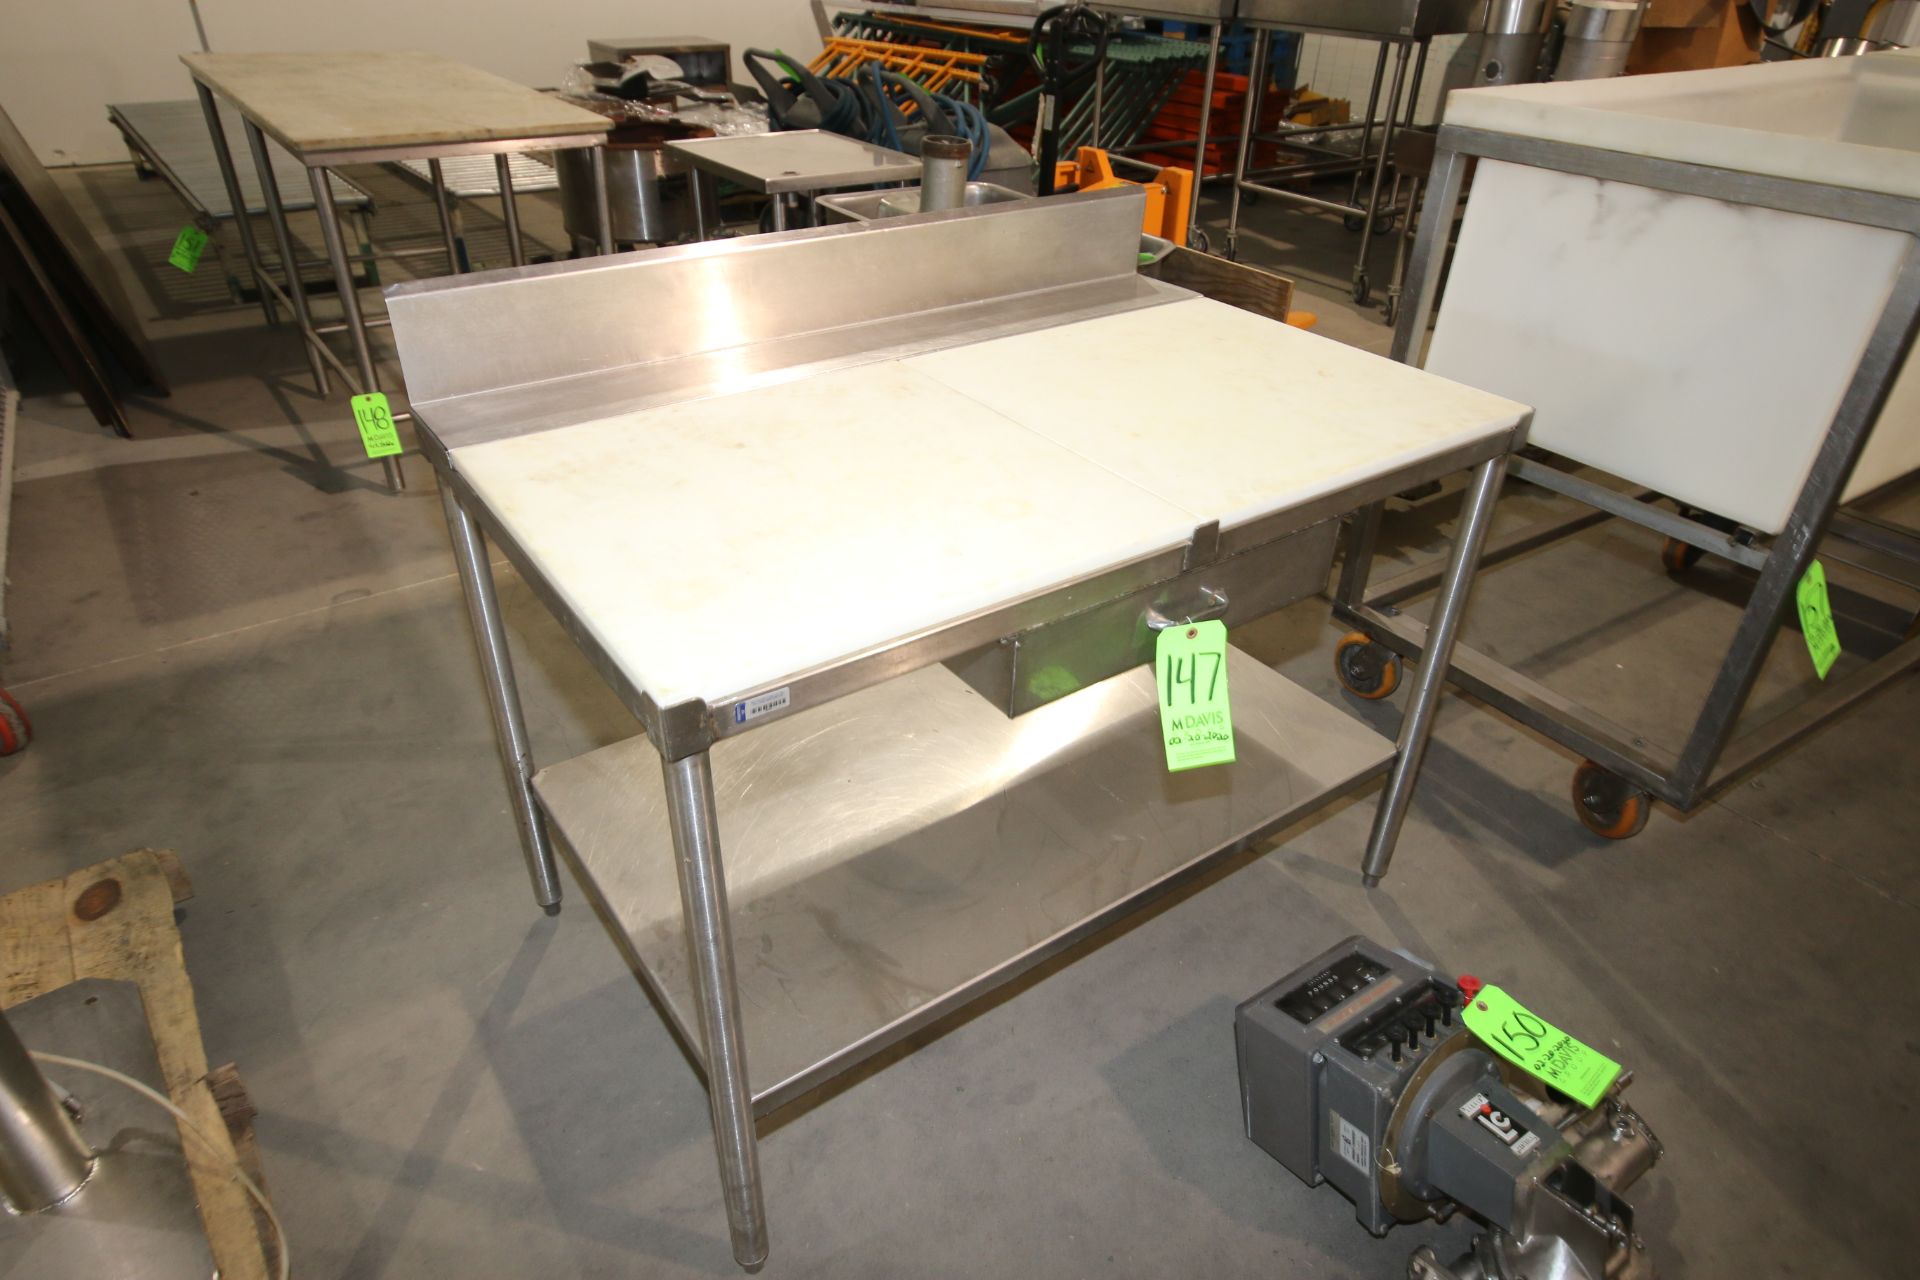 S/S Table with Cutting Board Table Top, Overall Dims.: Aprox. 48" L x 30" W x 39" H (LOCATED IN